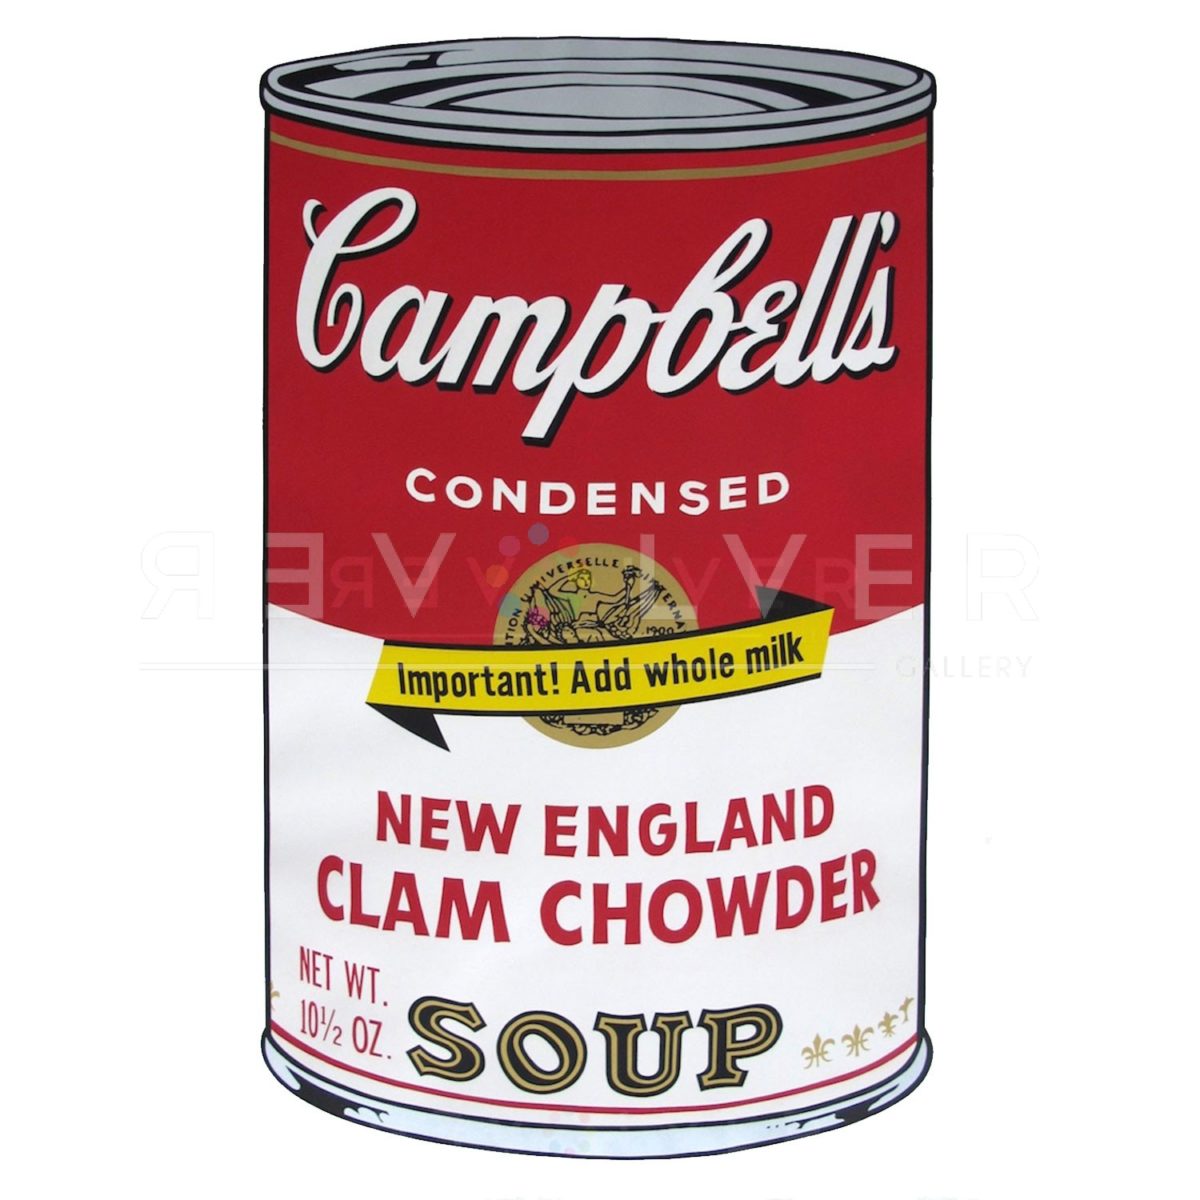 One of Ten Campbell's Soup Cans by Andy Warhol from 1969. Red and white can labeled New England Clam Chowder with a banner reading "Important! Add whole milk" ontop of Campbell's golden seal.